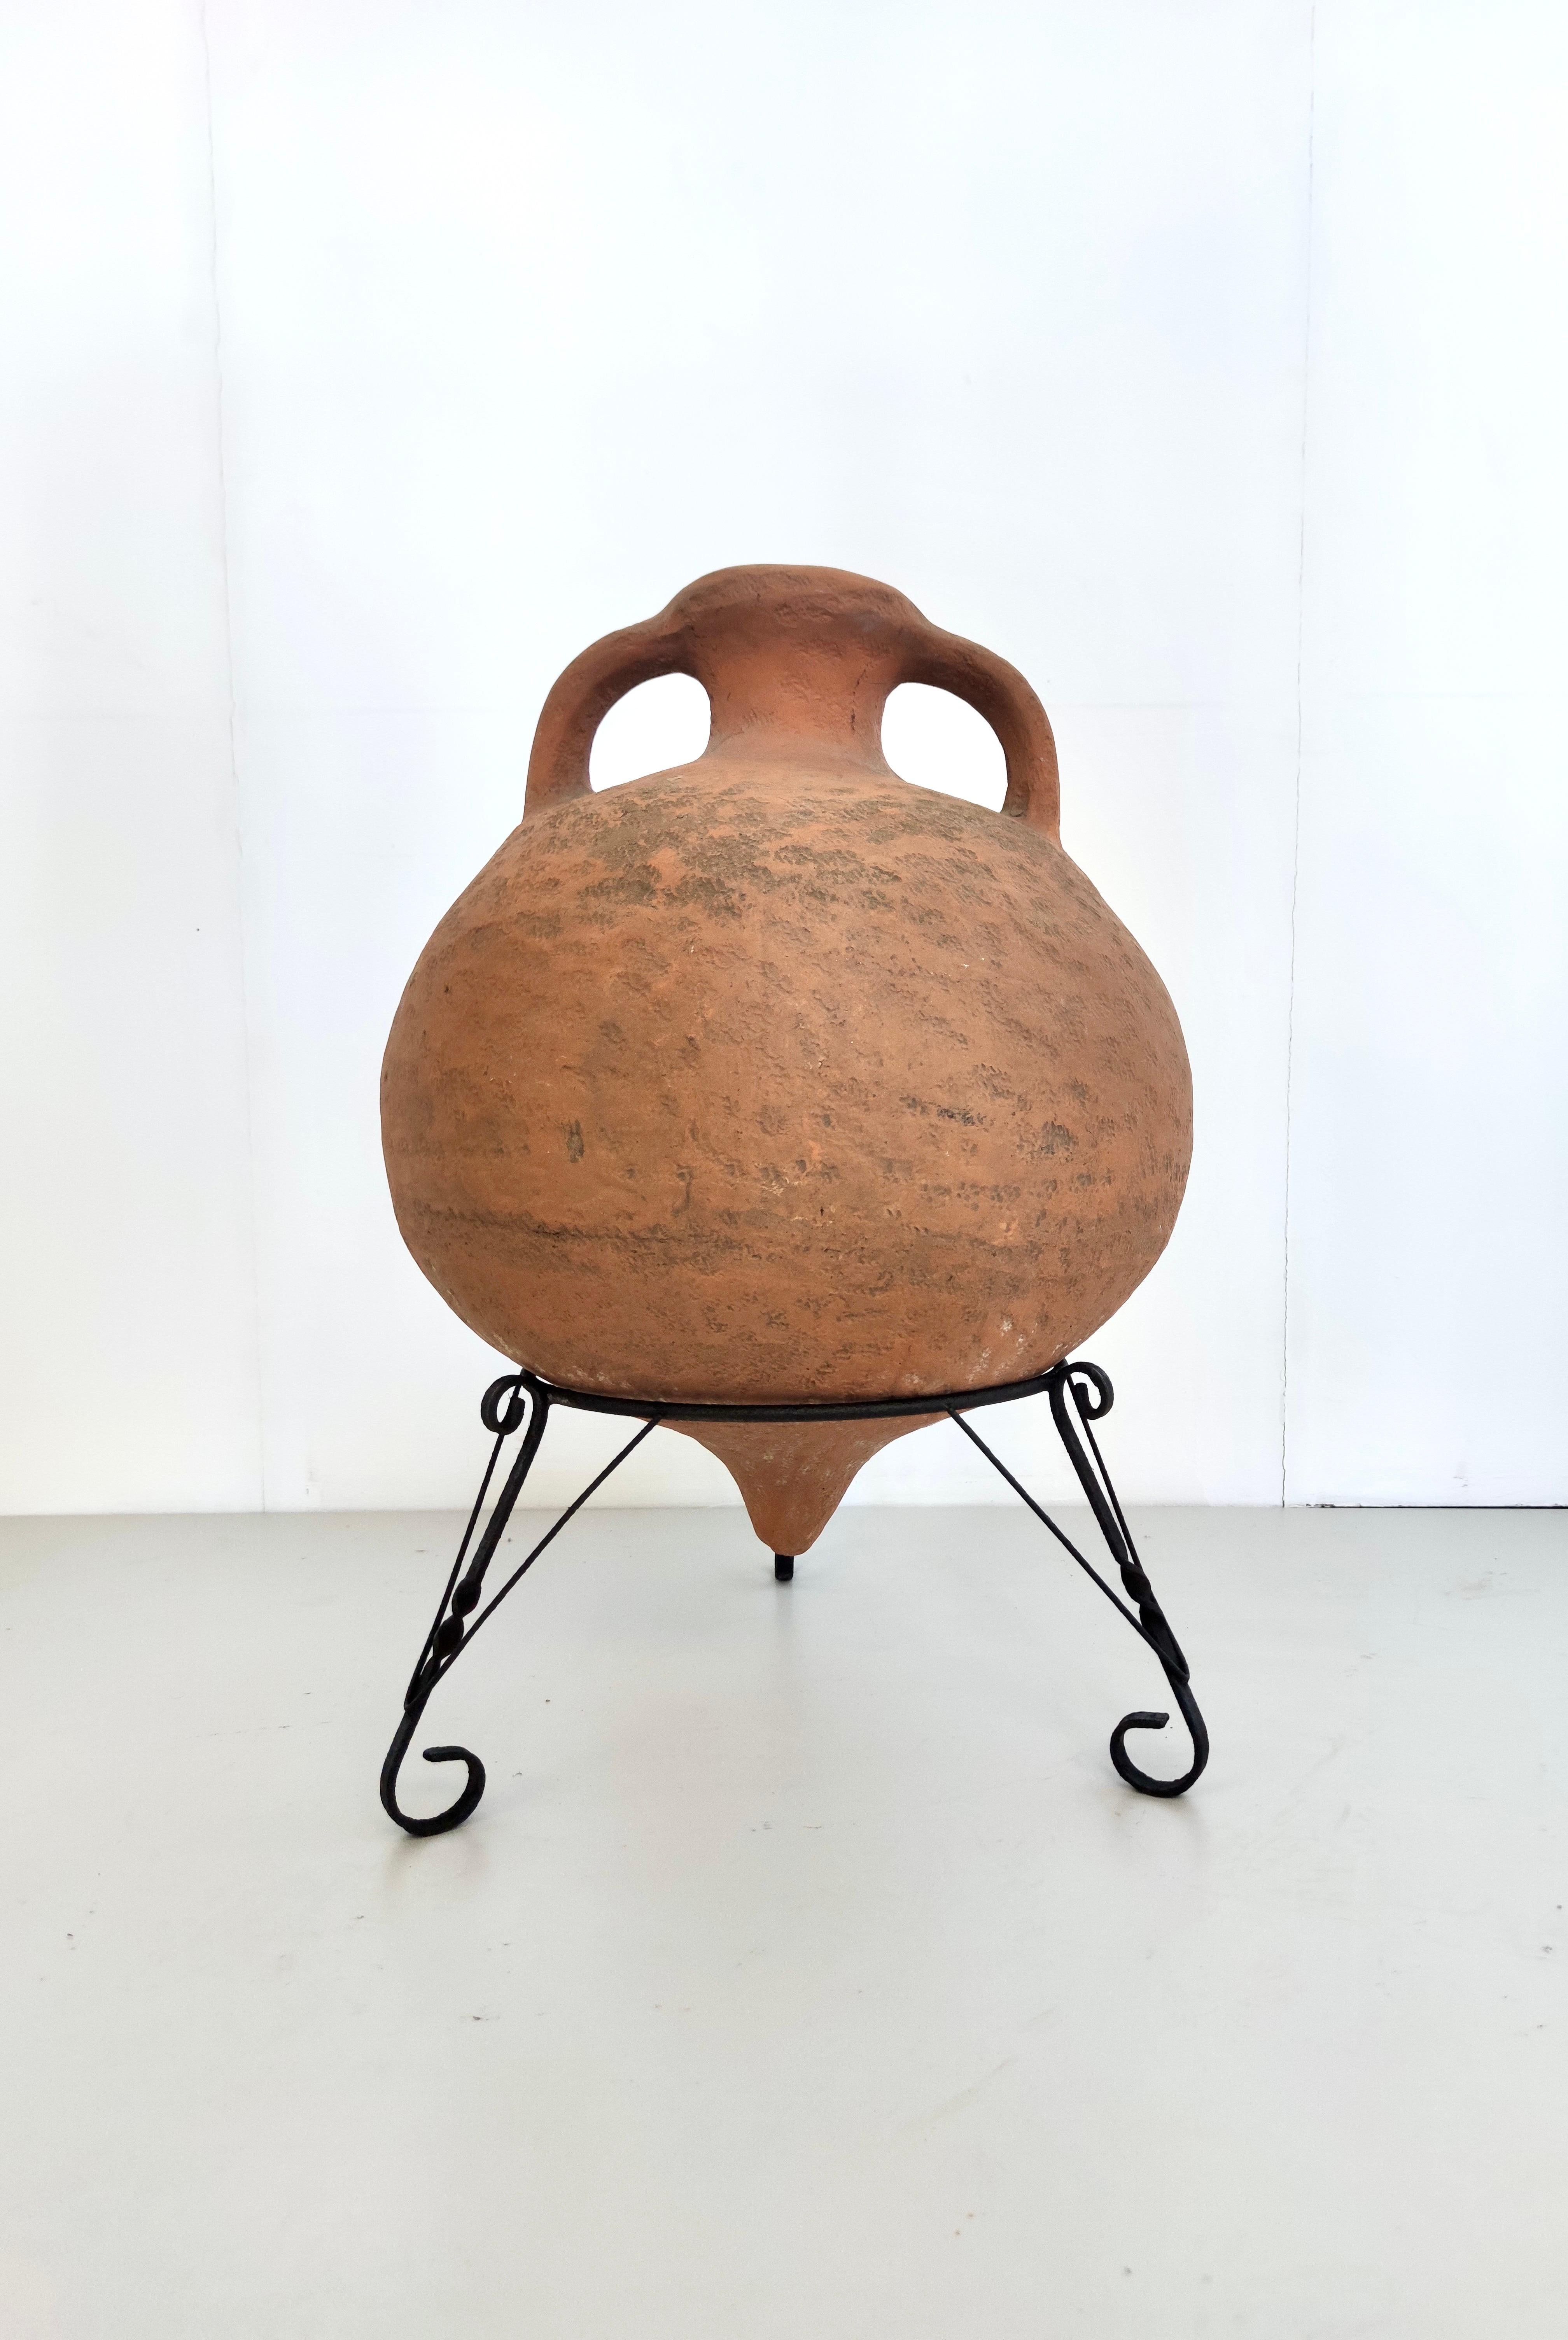 Vintage Hand-Modeled Earthenware Jar with a Black Varnished Iron Stand, Italy In Excellent Condition For Sale In Bresso, Lombardy